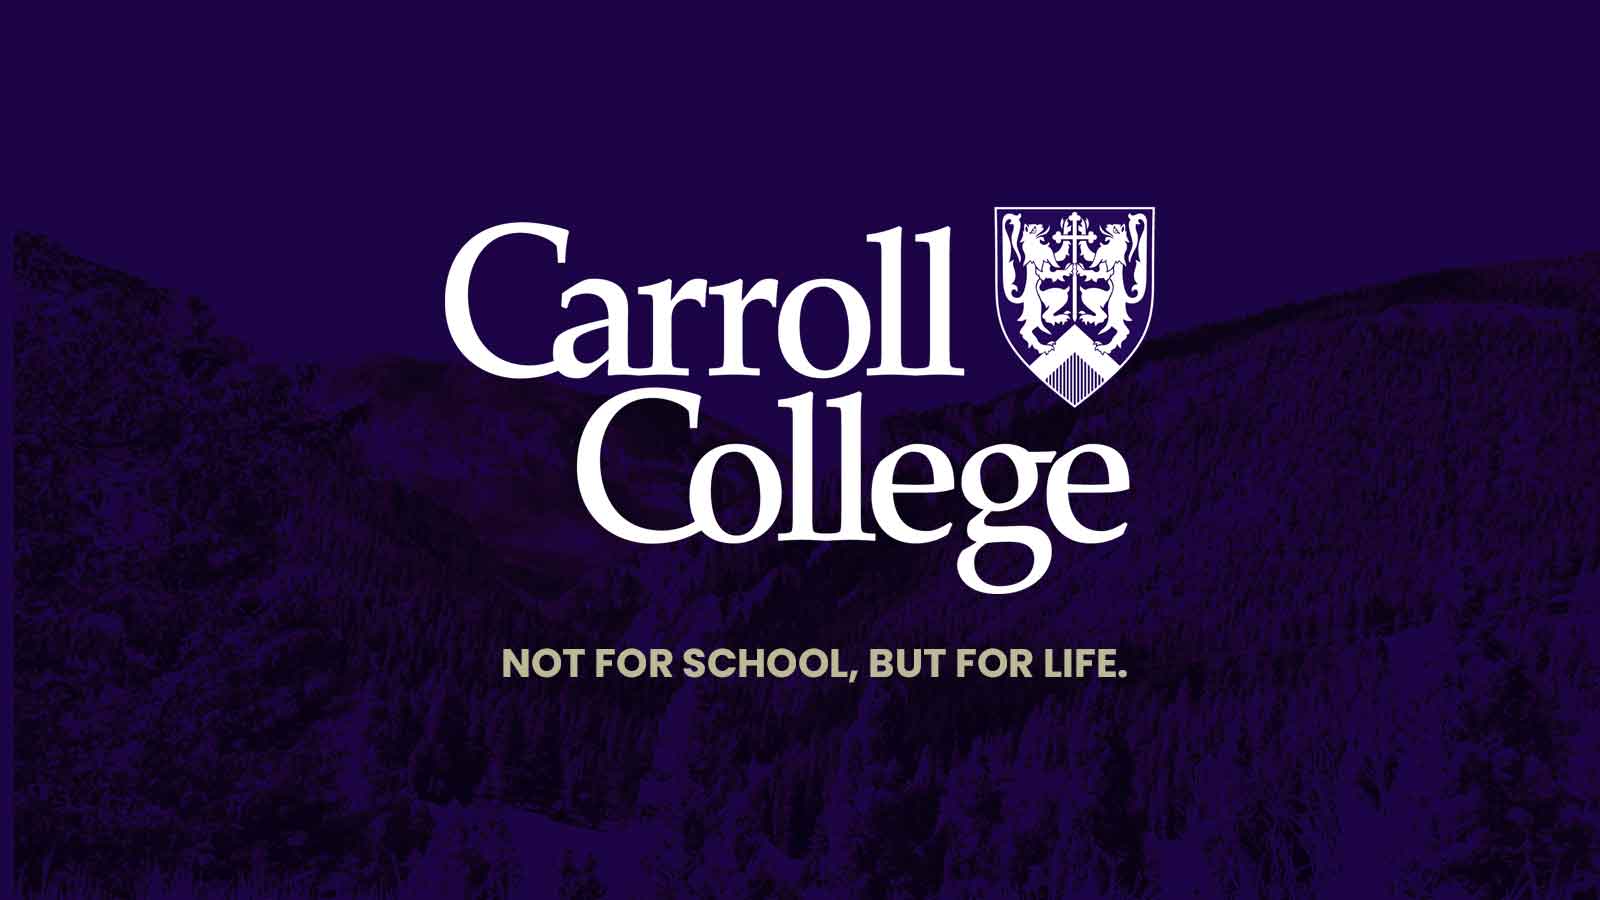 Carroll Department of Business granted first-time accreditation with IACBE